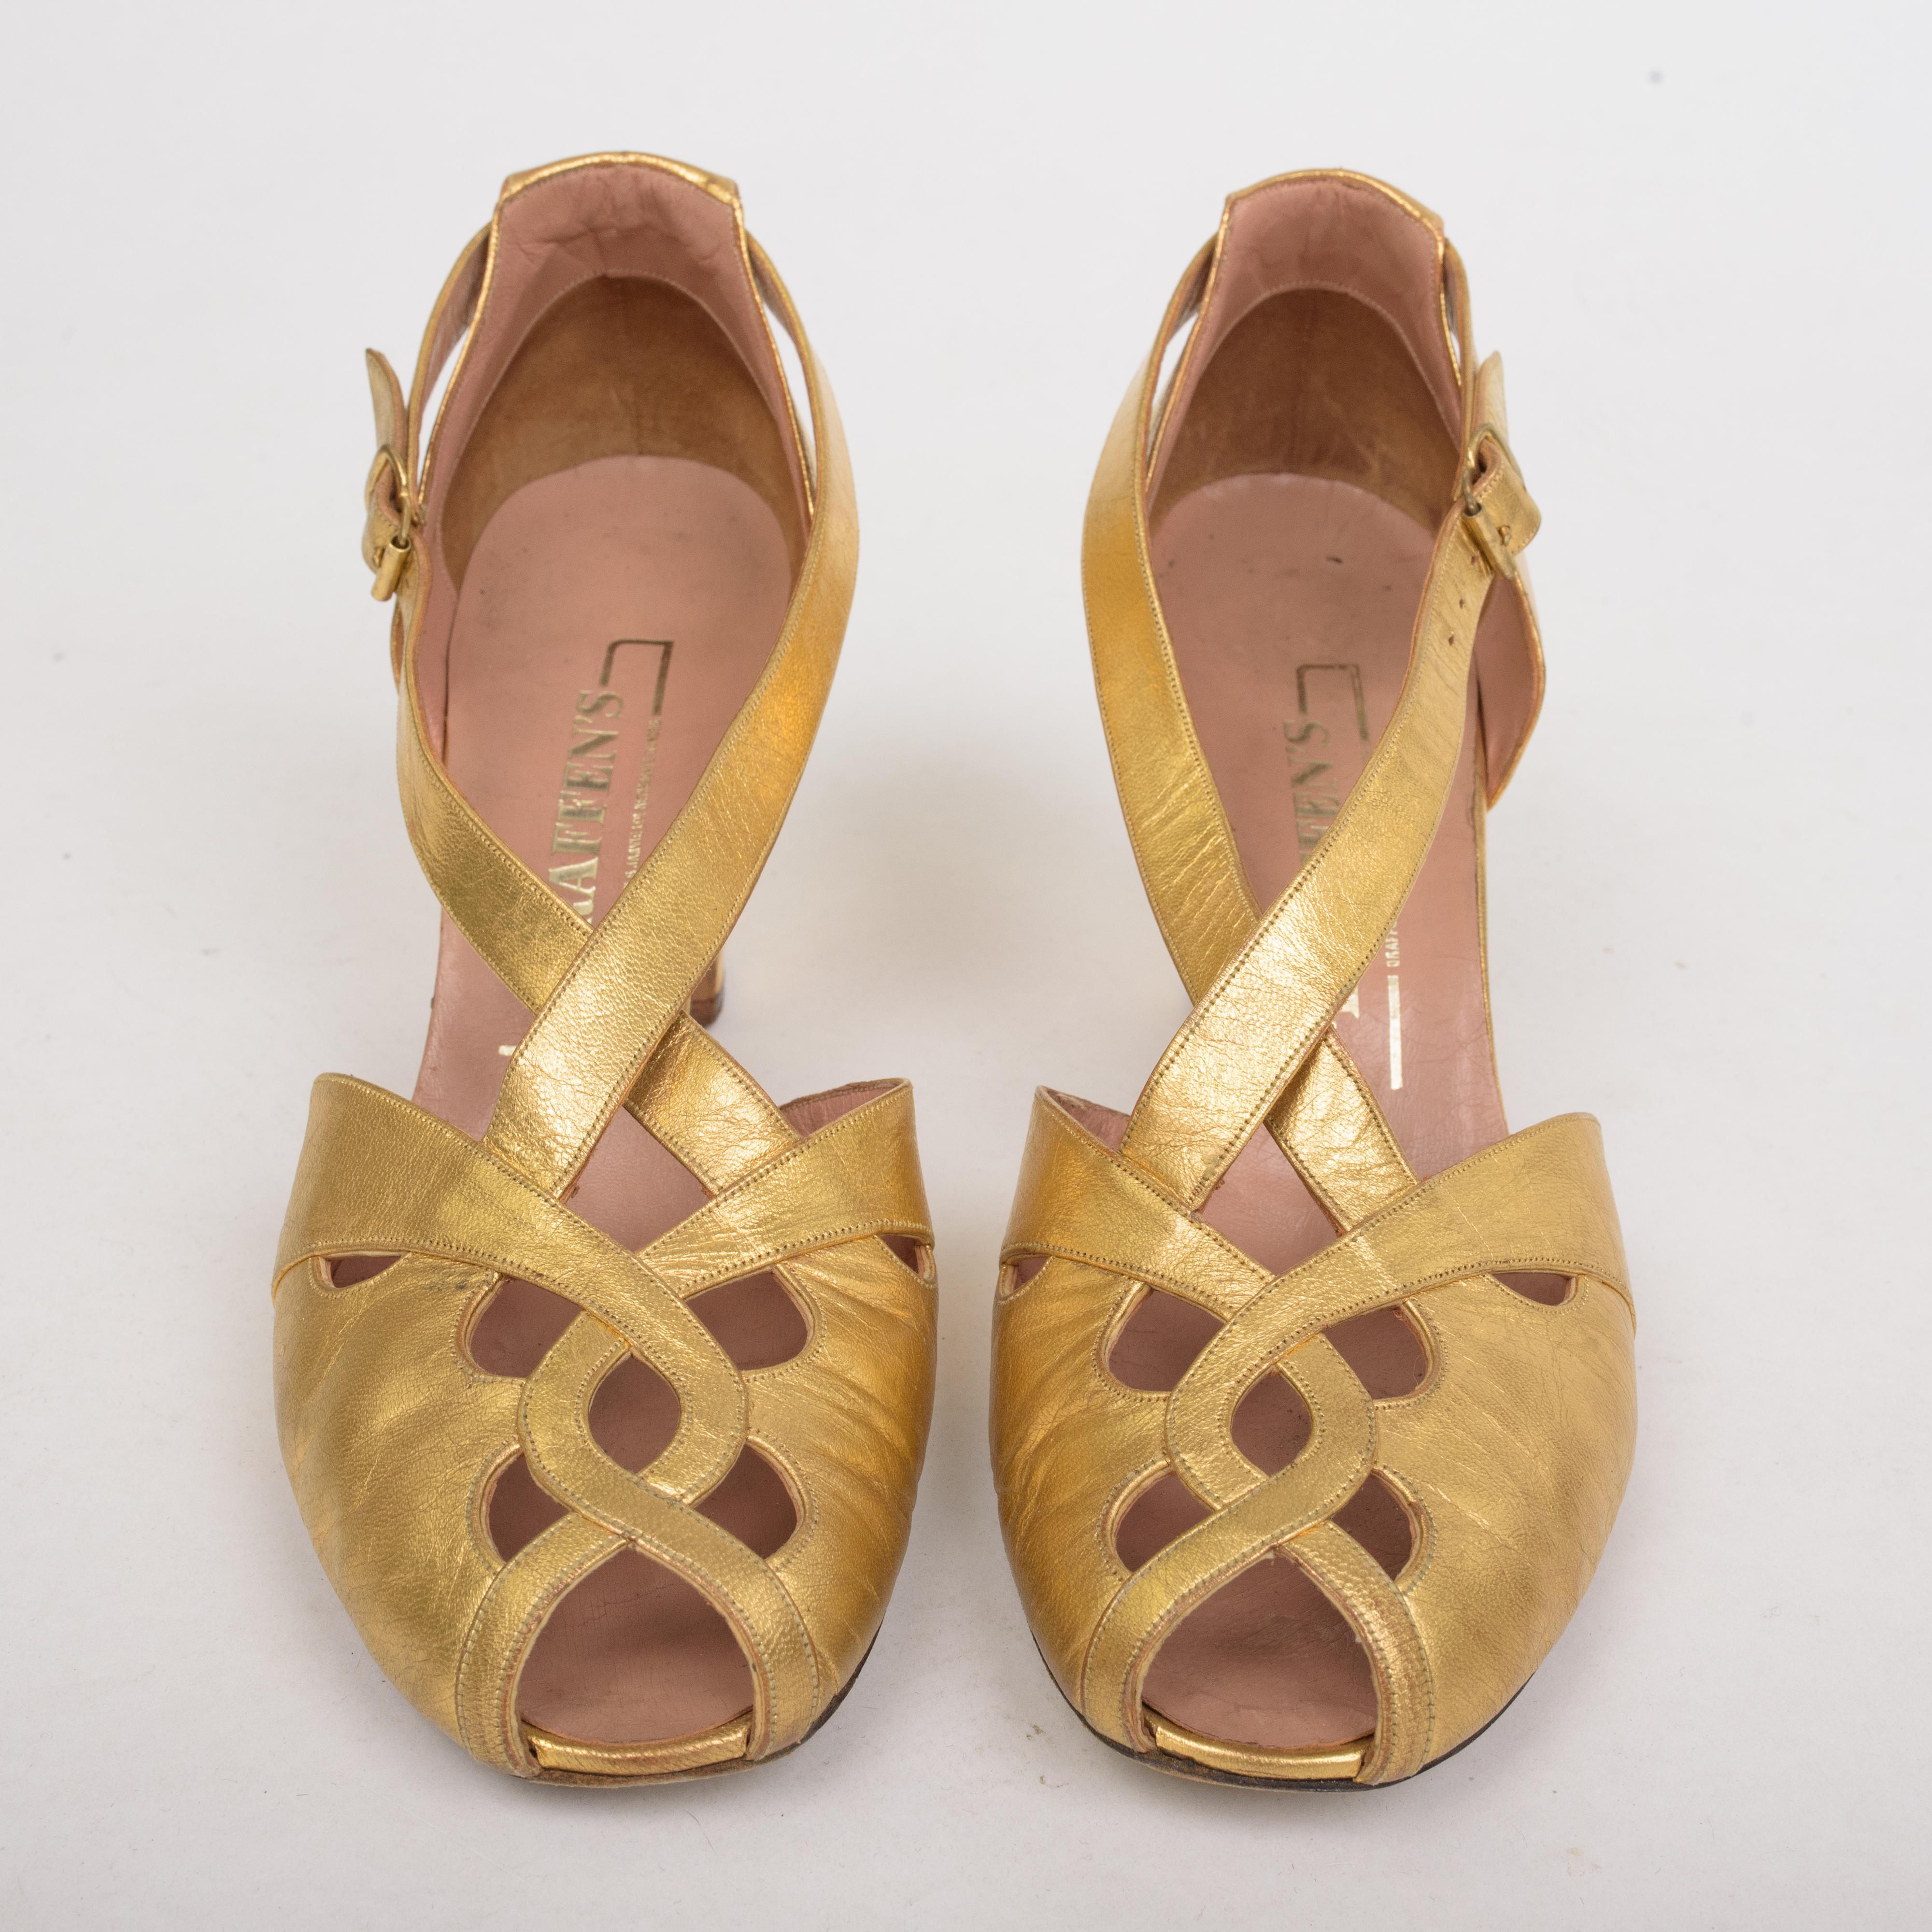 Circa 1940/1950

England

Beautiful pair of prom or evening shoes with the british Draffen's label and dating from the 1930s or 1940s. Often called Salomés or Charles IX, these shoes with refined elegance feature an openwork vamp with a crossed